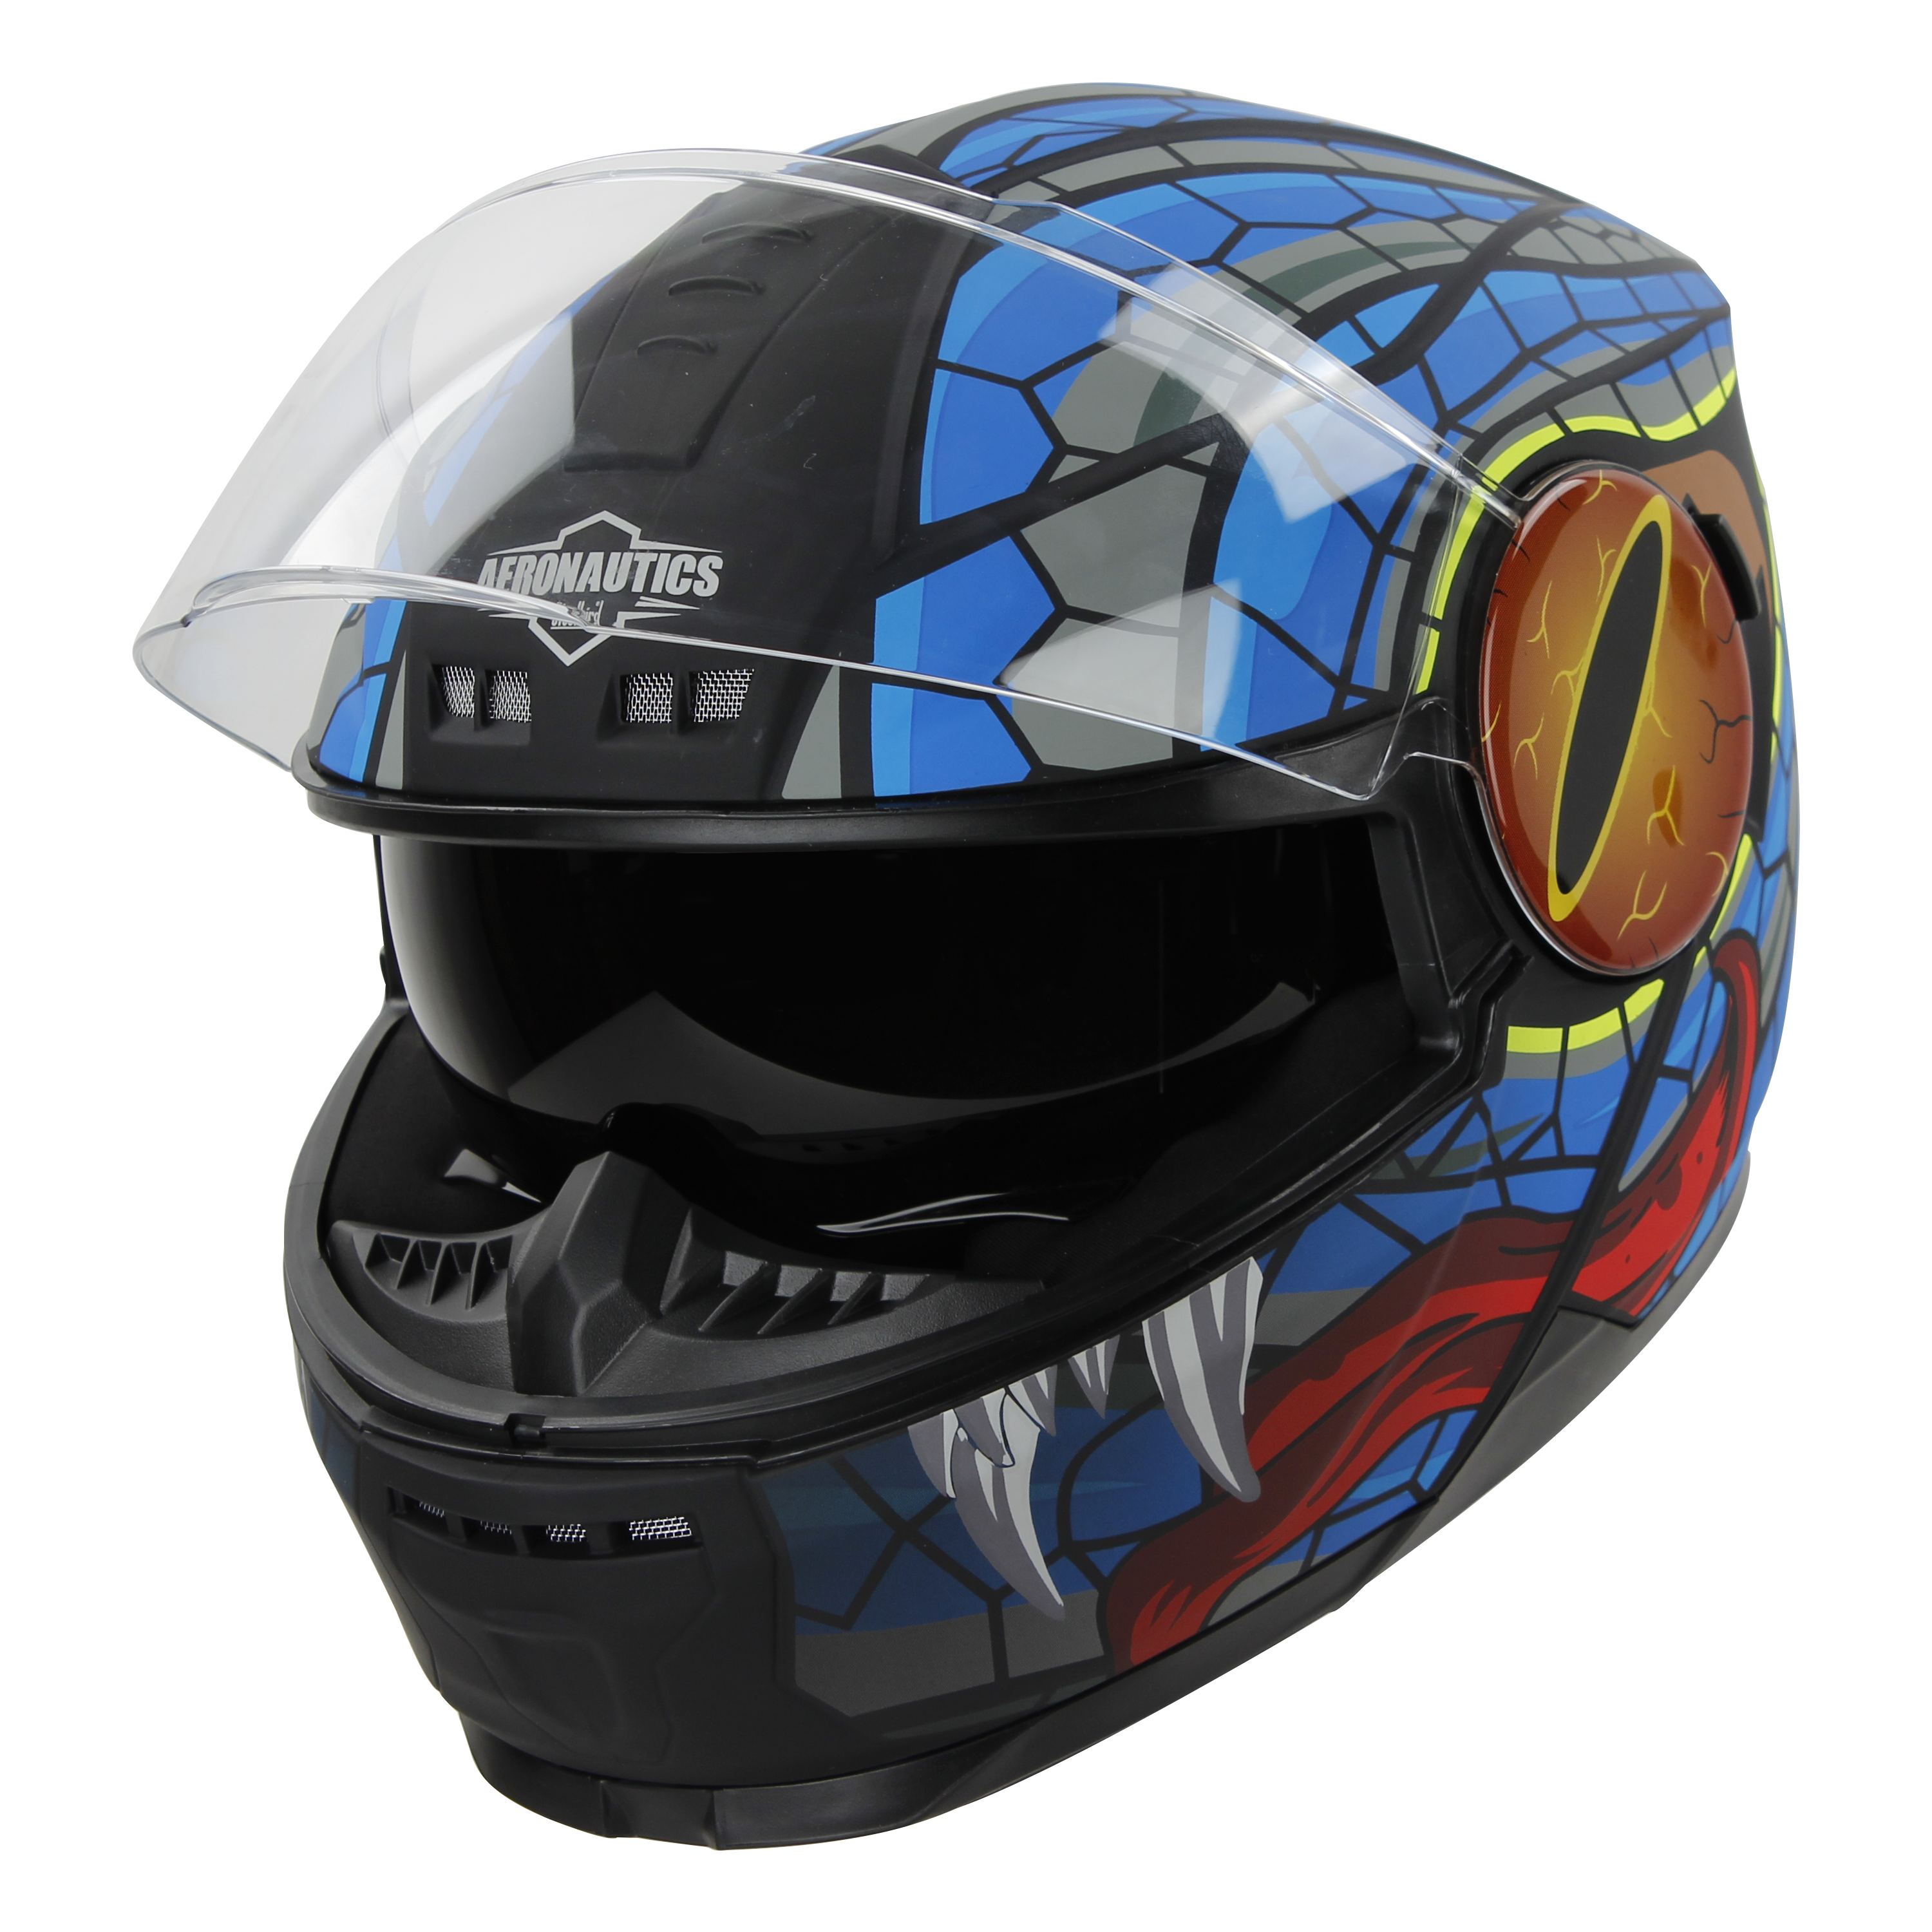 SBH-40 MAMBA GLOSSY BLACK WITH BLUE (INNER SUN SHIELD AND HIGH-END INTERIOR)